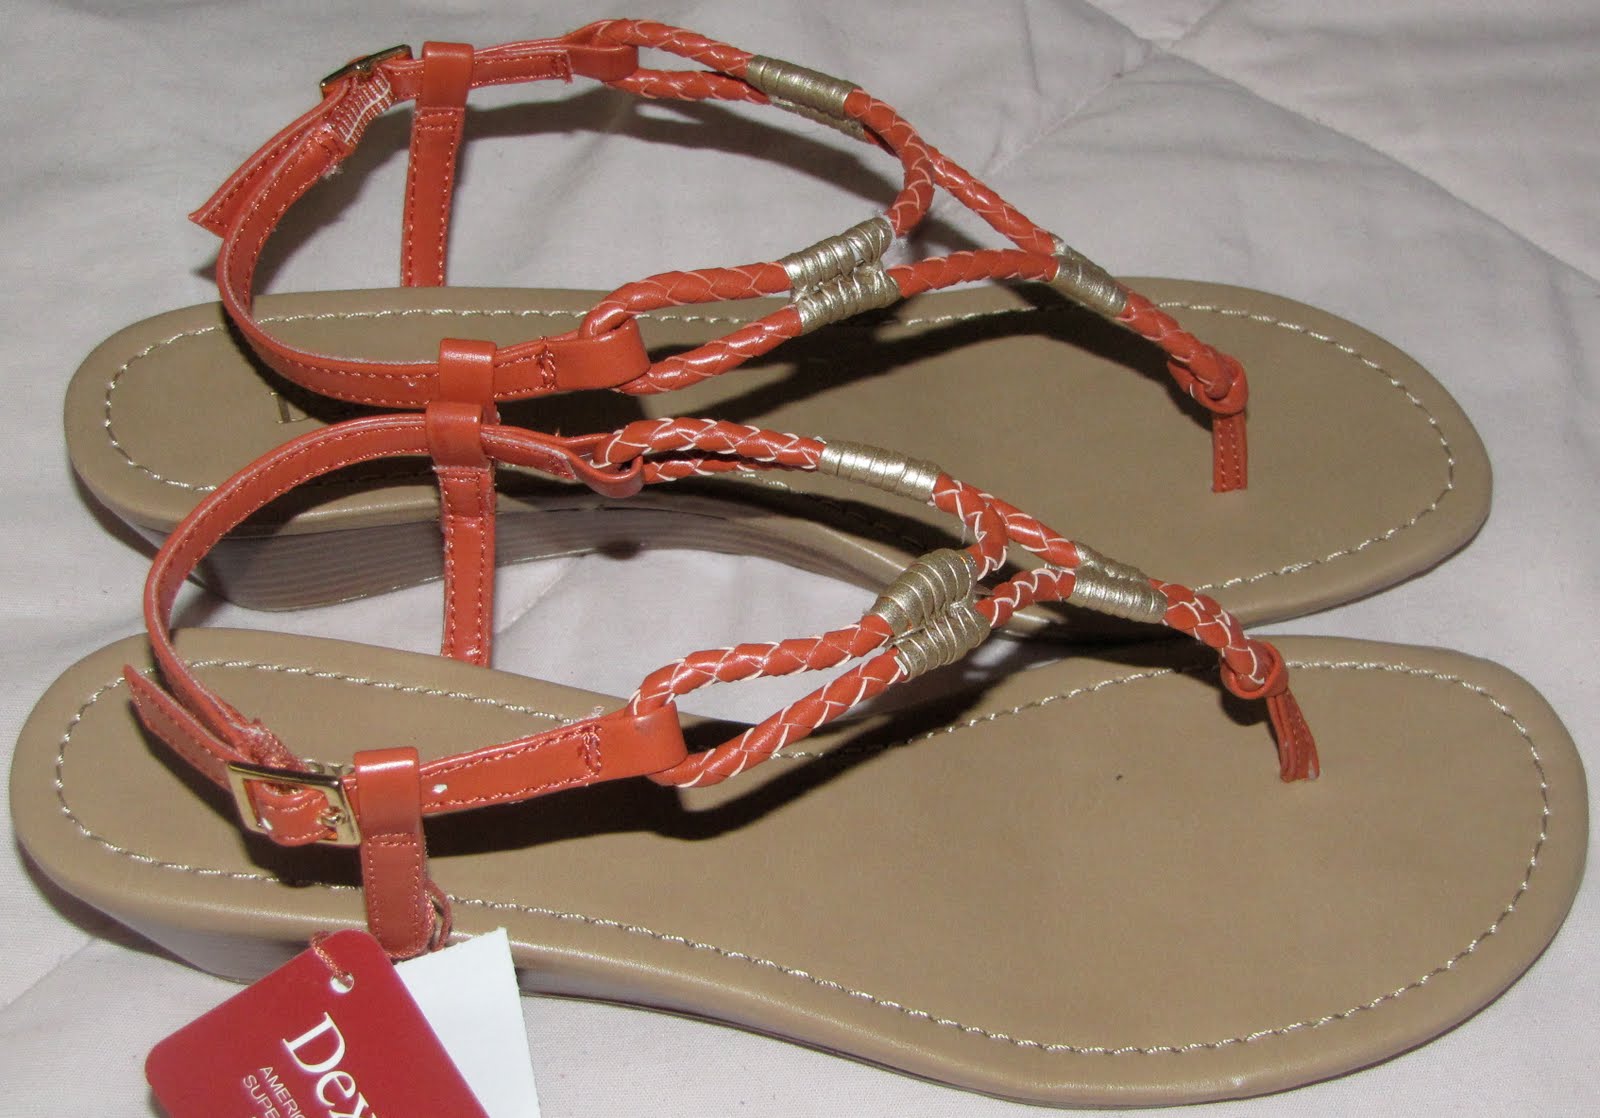 Nothing found for 2010 05 Payless-sandal-haul